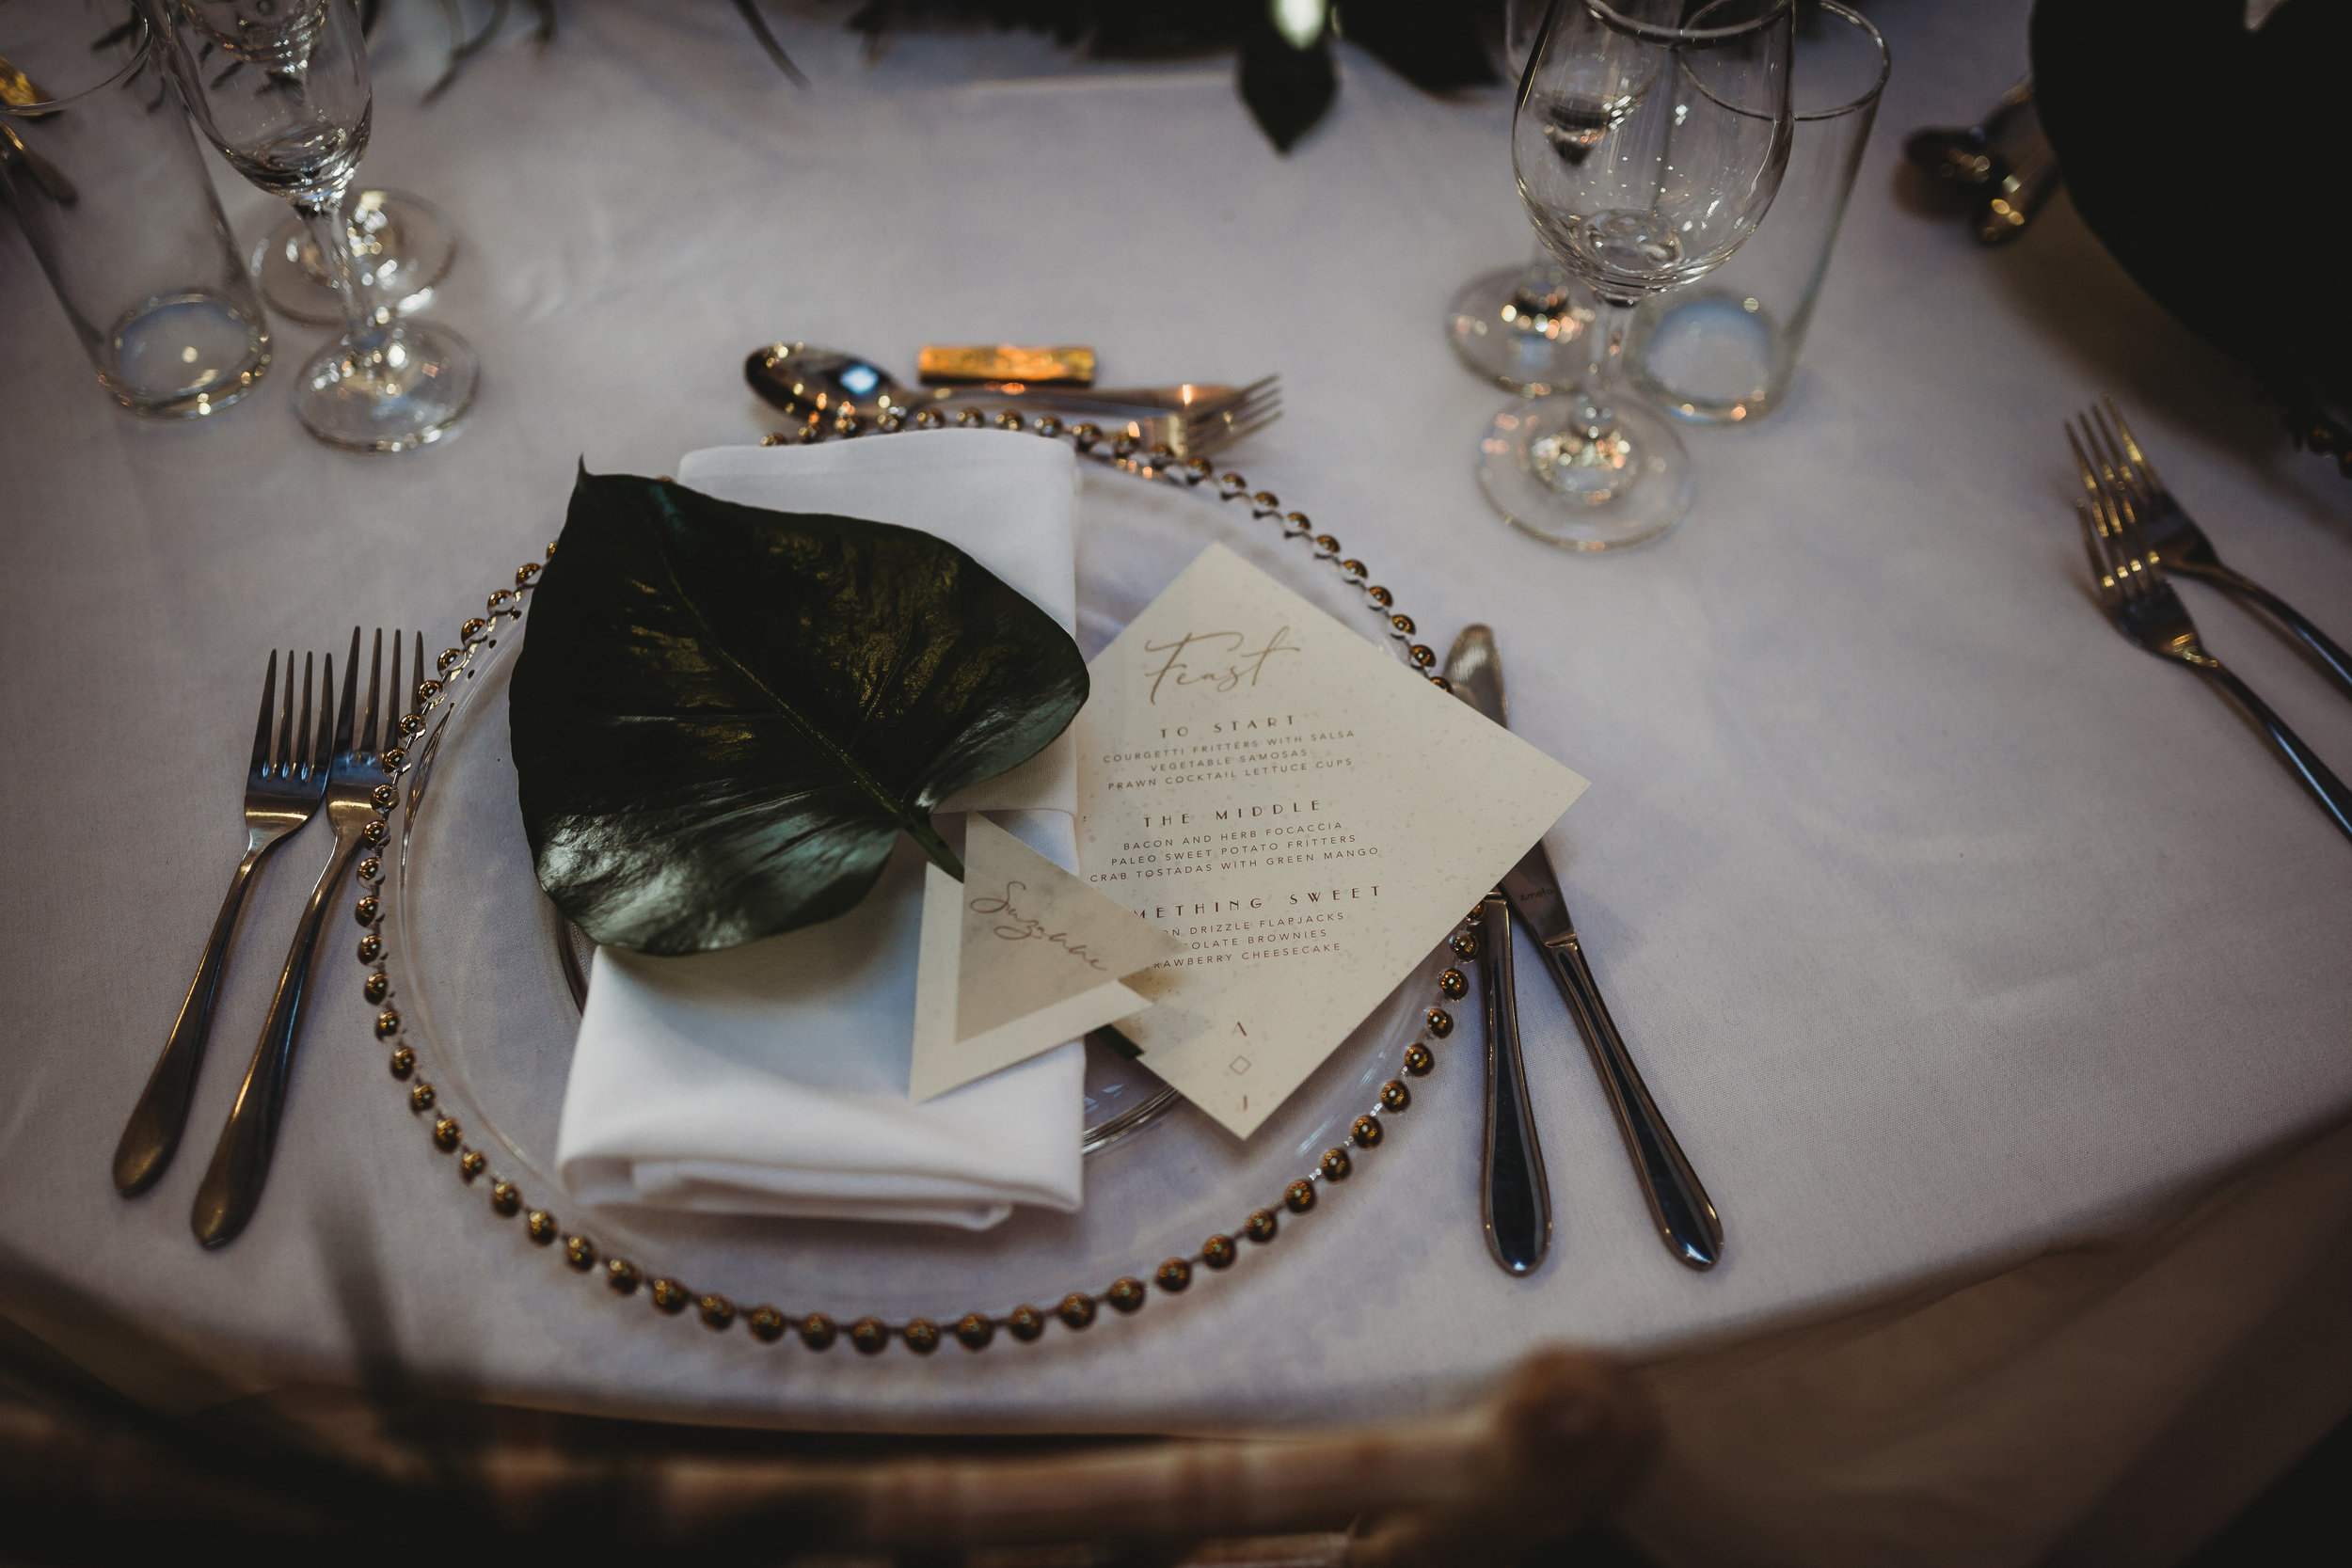  Modern wedding place setting with foliage decoration by All Bunched Up wedding flowers at The Pumping House, Ollerton. 